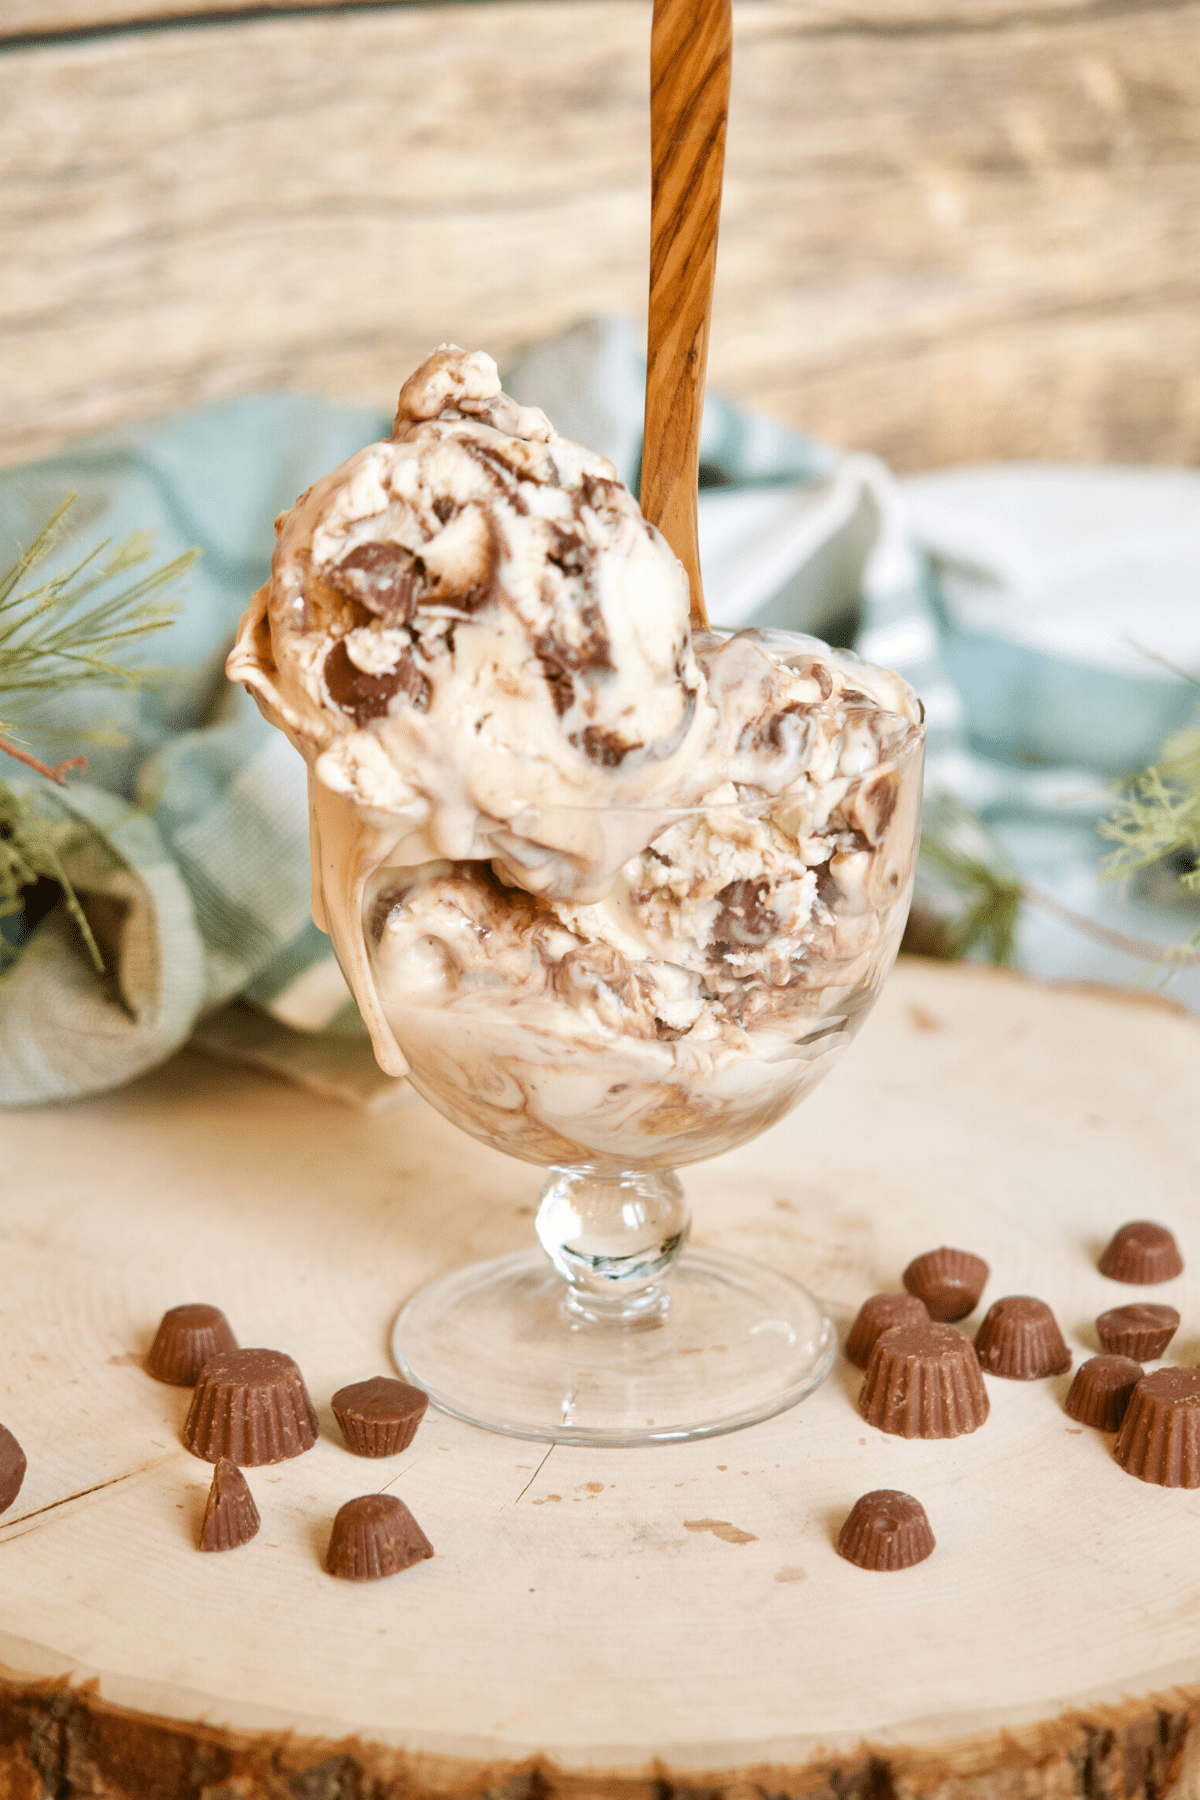 Image of moose tracks ice cream in glass ice cream bowl with wooden spoon in the top.